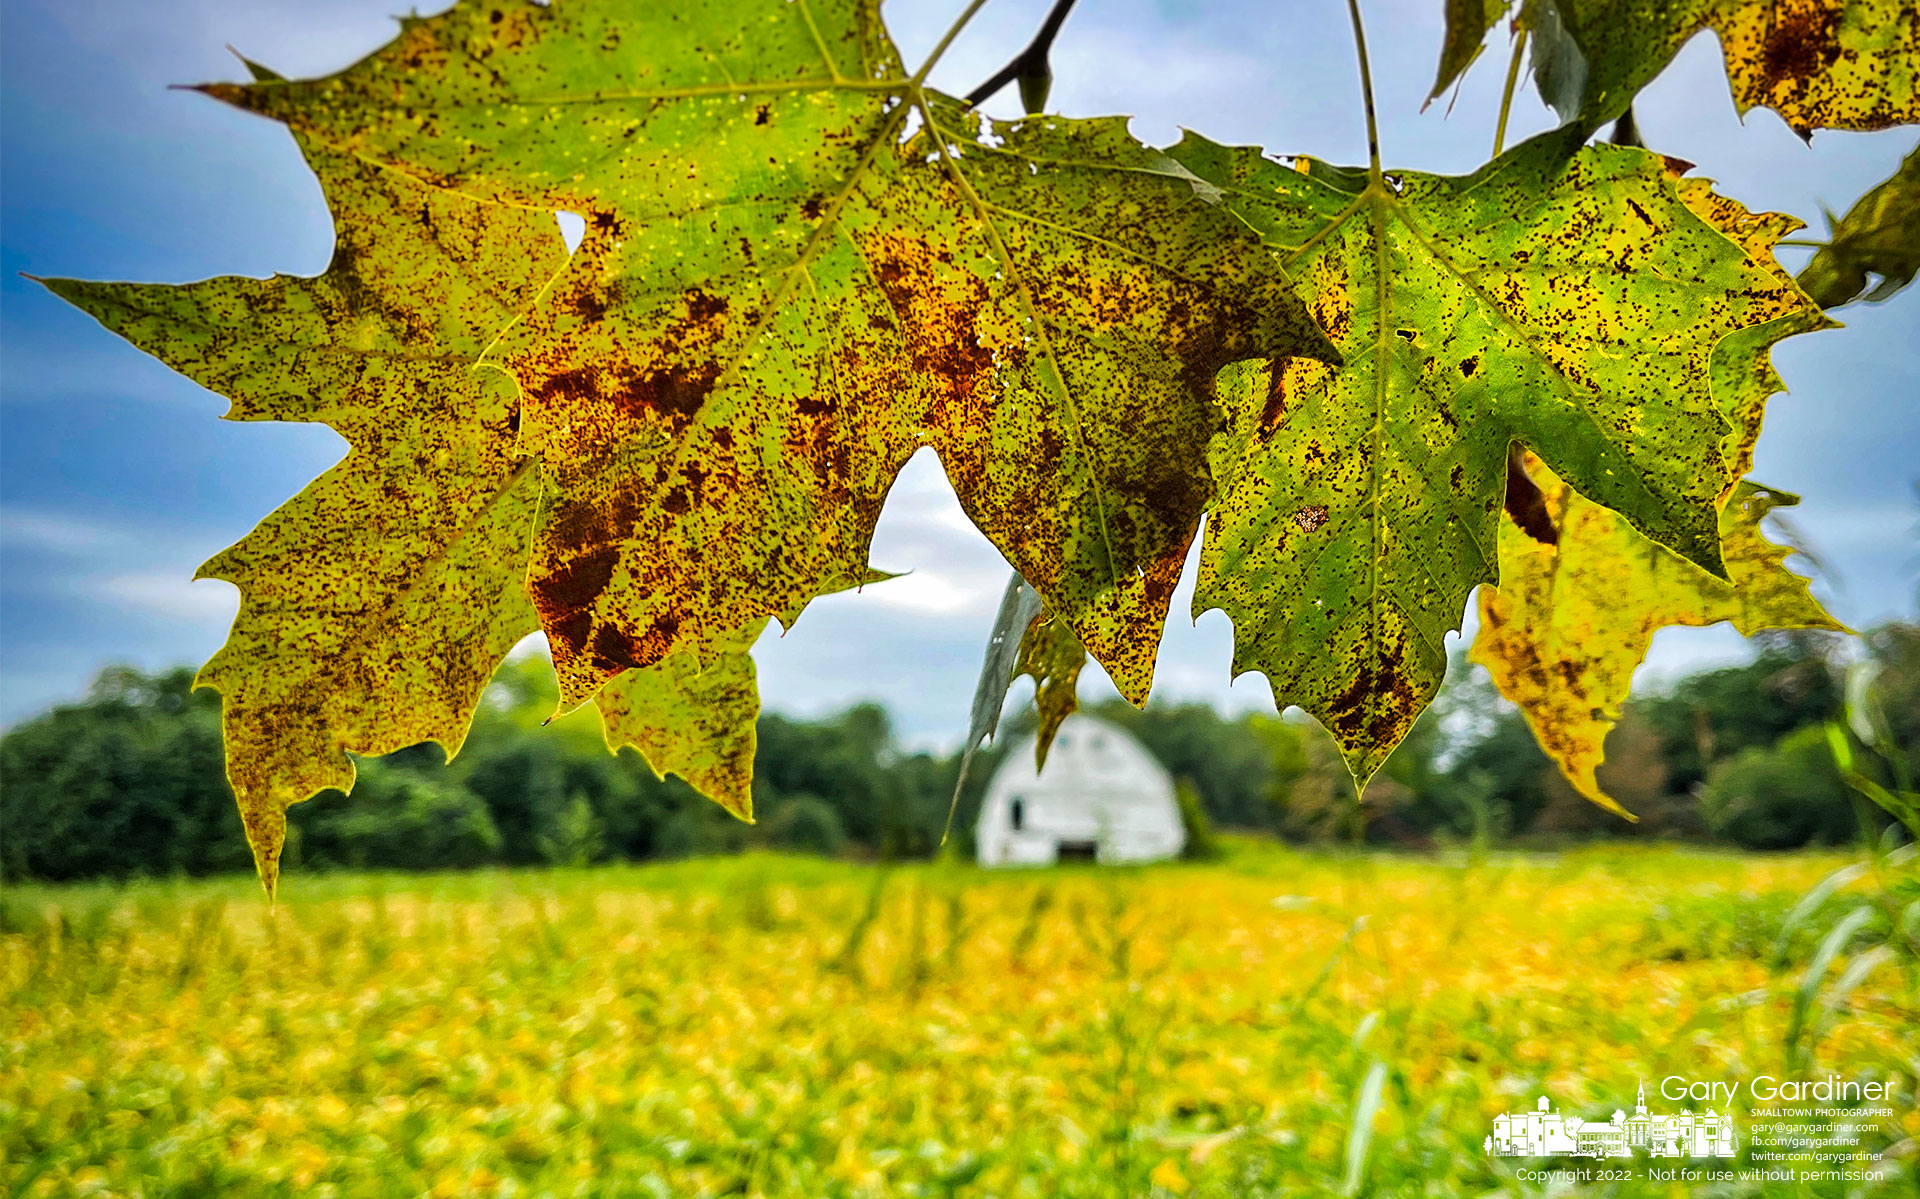 Both maple leaves and soybeans are turning the golden colors of fall as the crops mature and the trees begin to go dormant for the winter. My Final Photo for September 19, 2022.